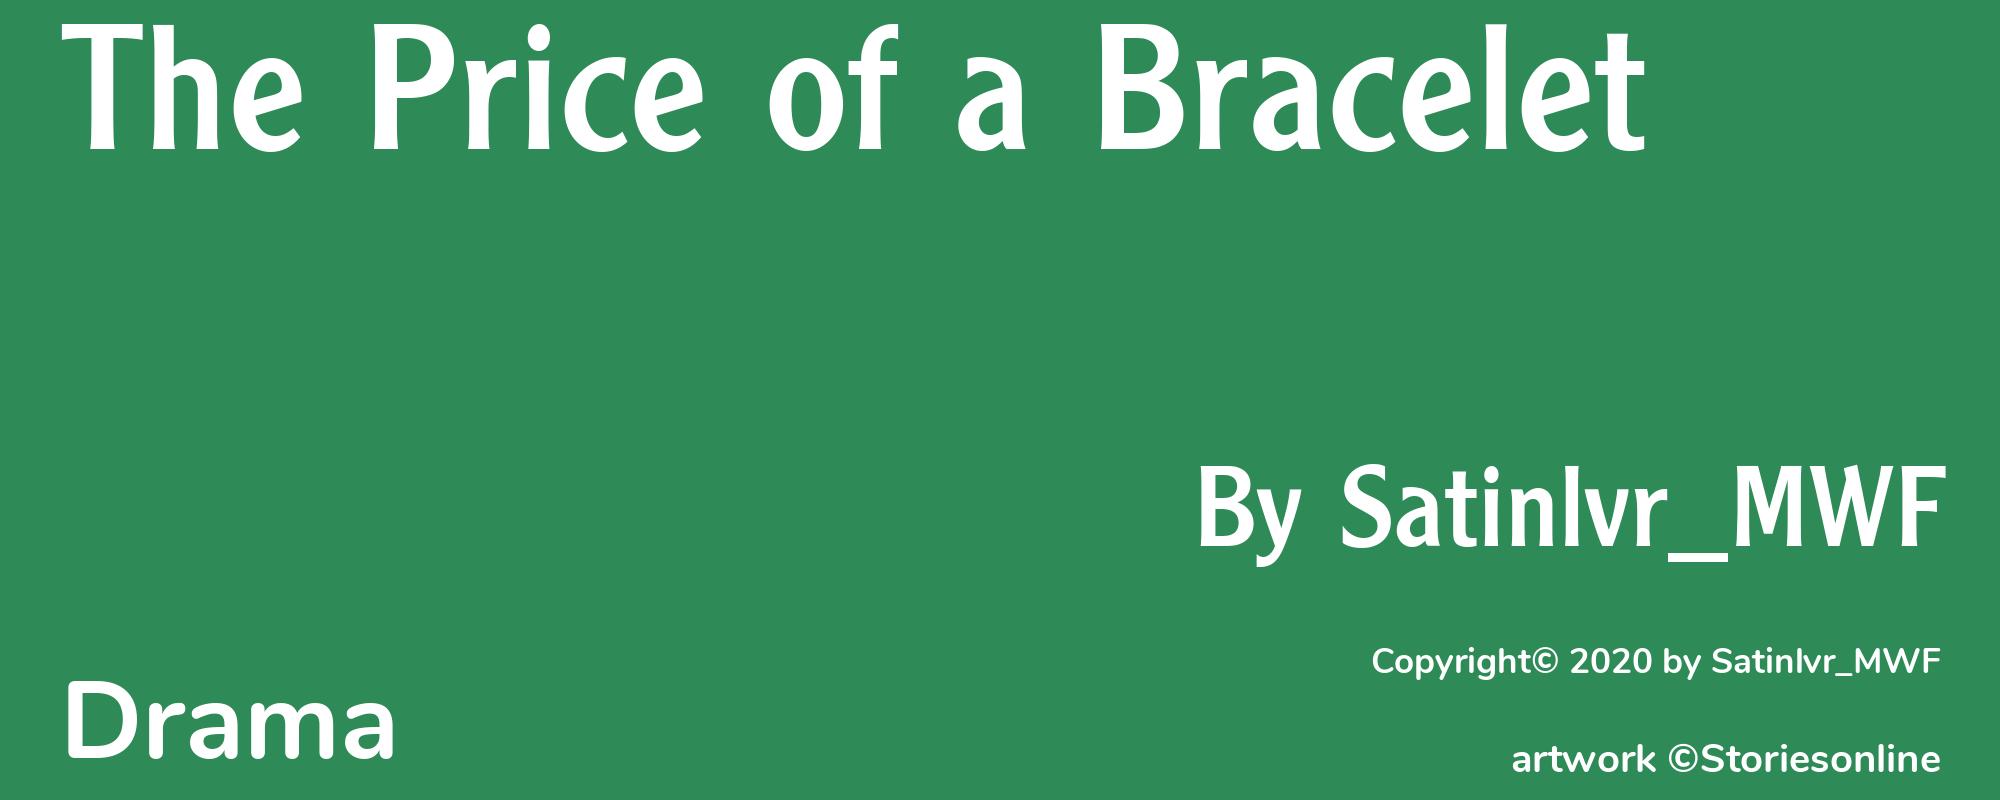 The Price of a Bracelet - Cover